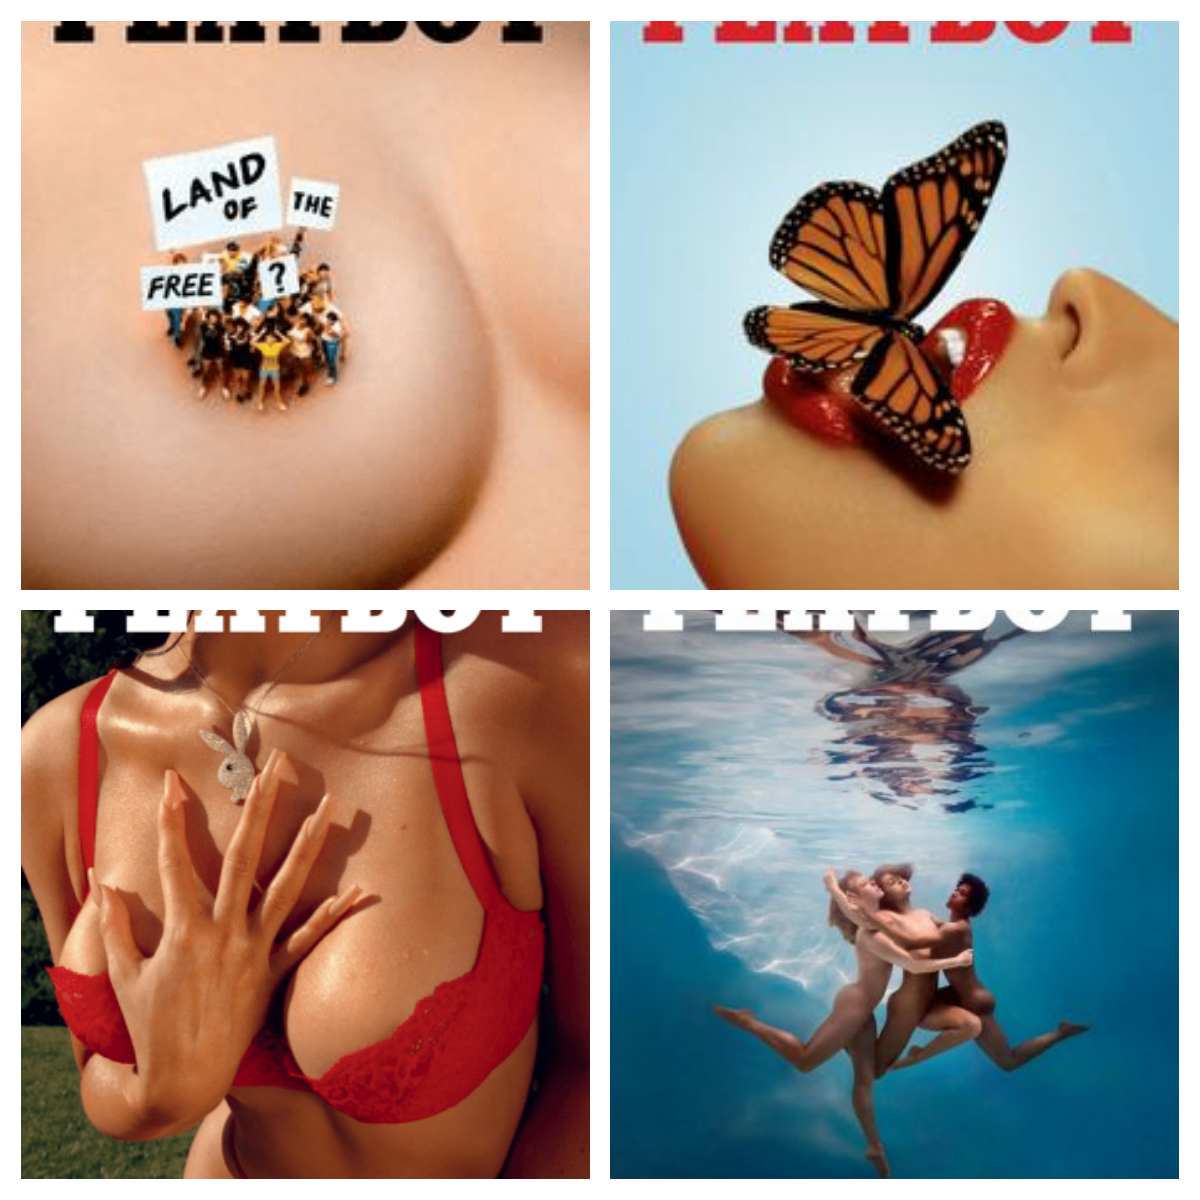 Playboy USA - 2019 Full Year Issues